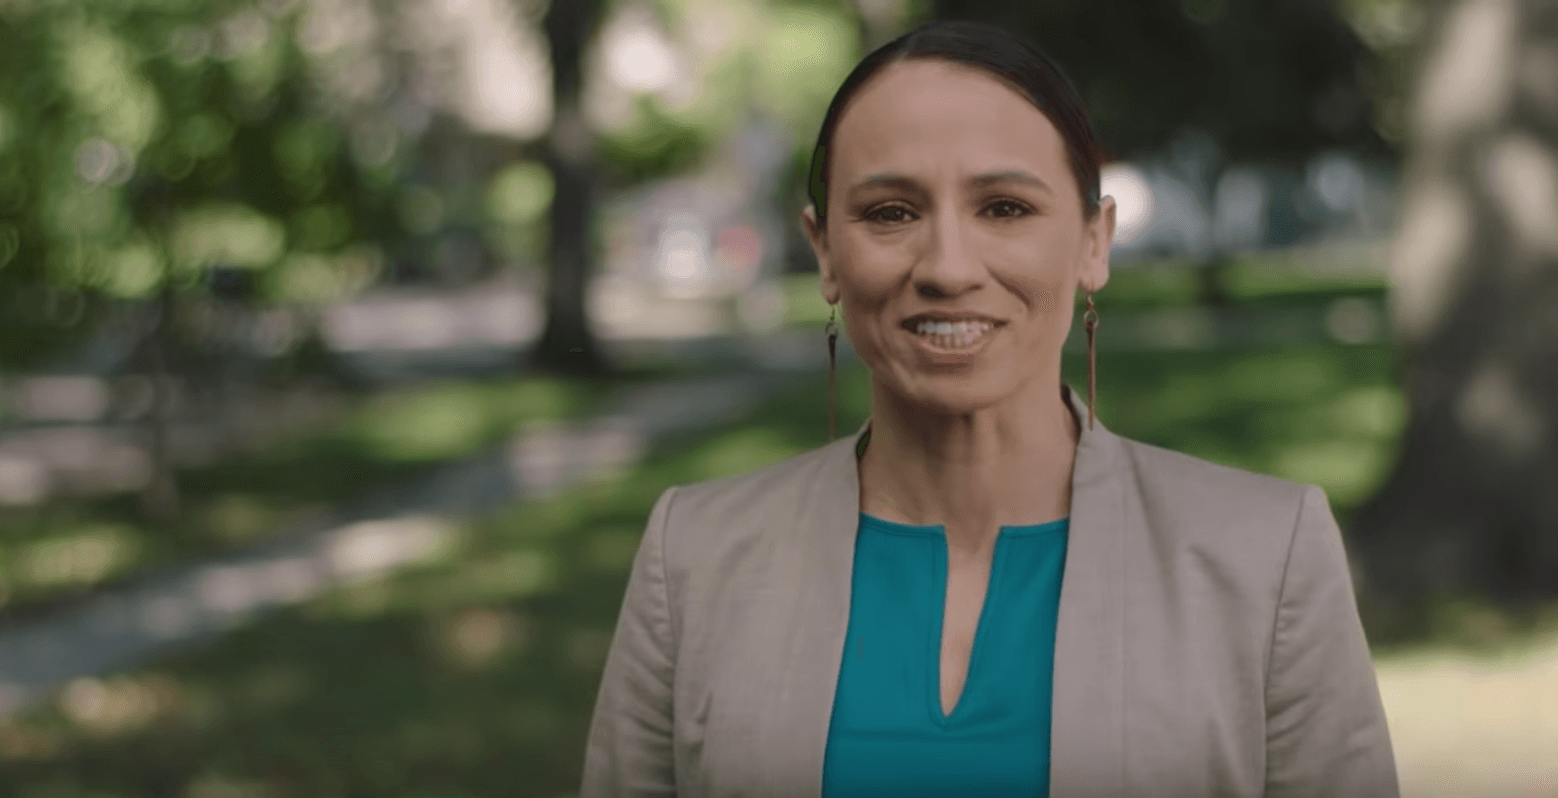 Sharice Davids stands under trees and smiles